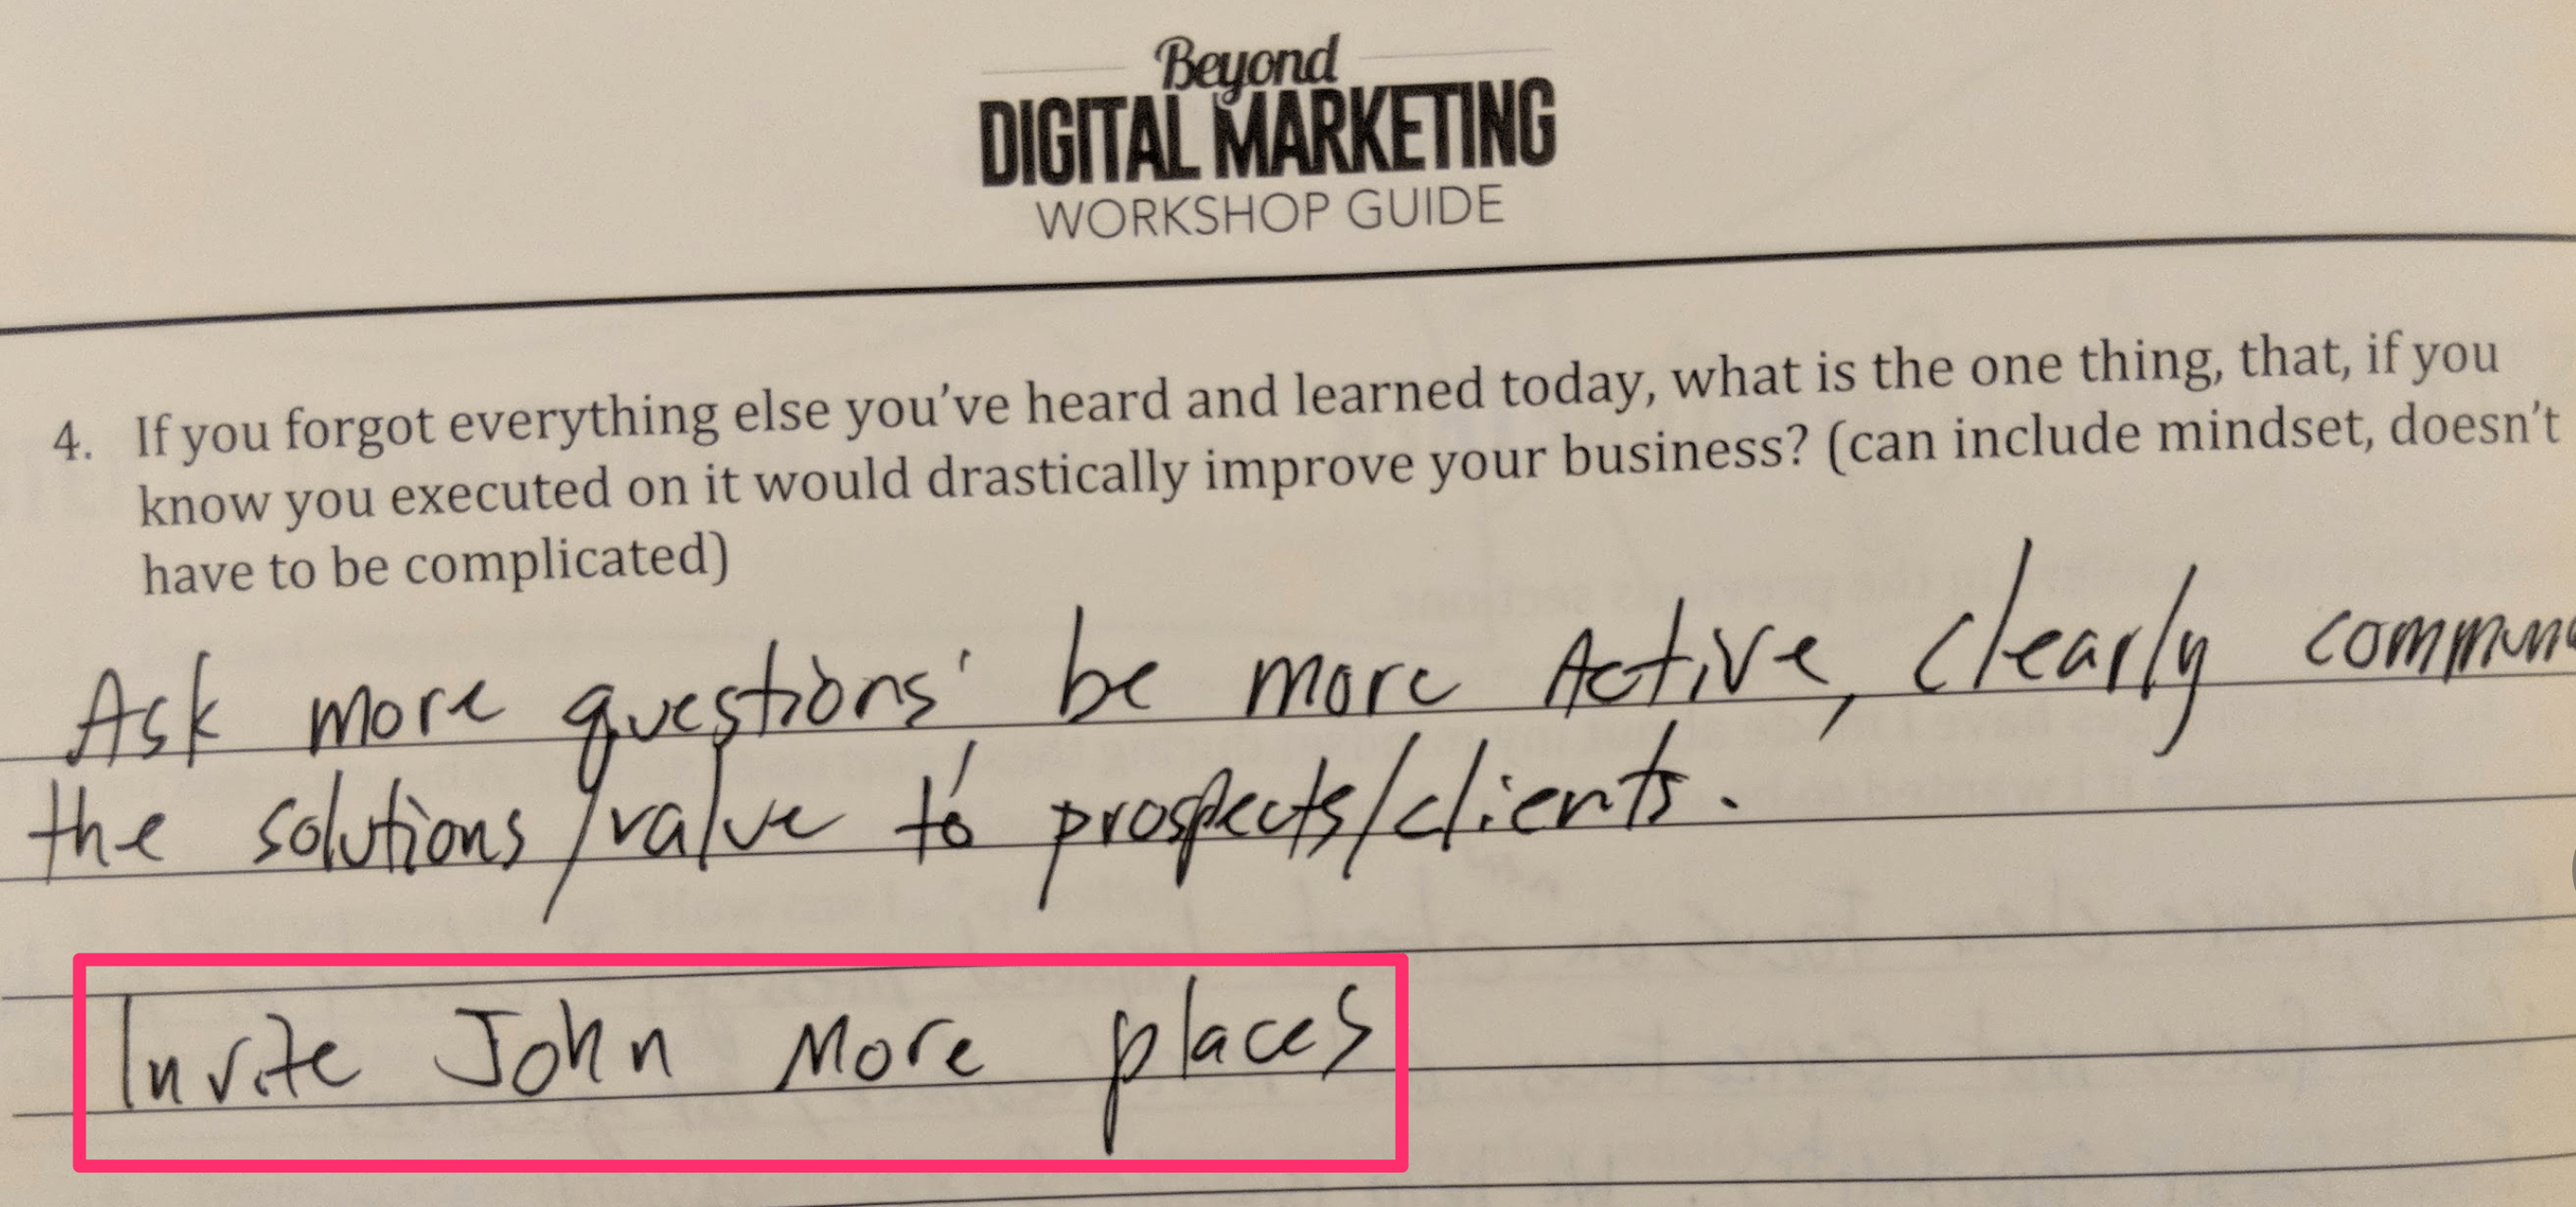 learned one thing from digital marketing workshop